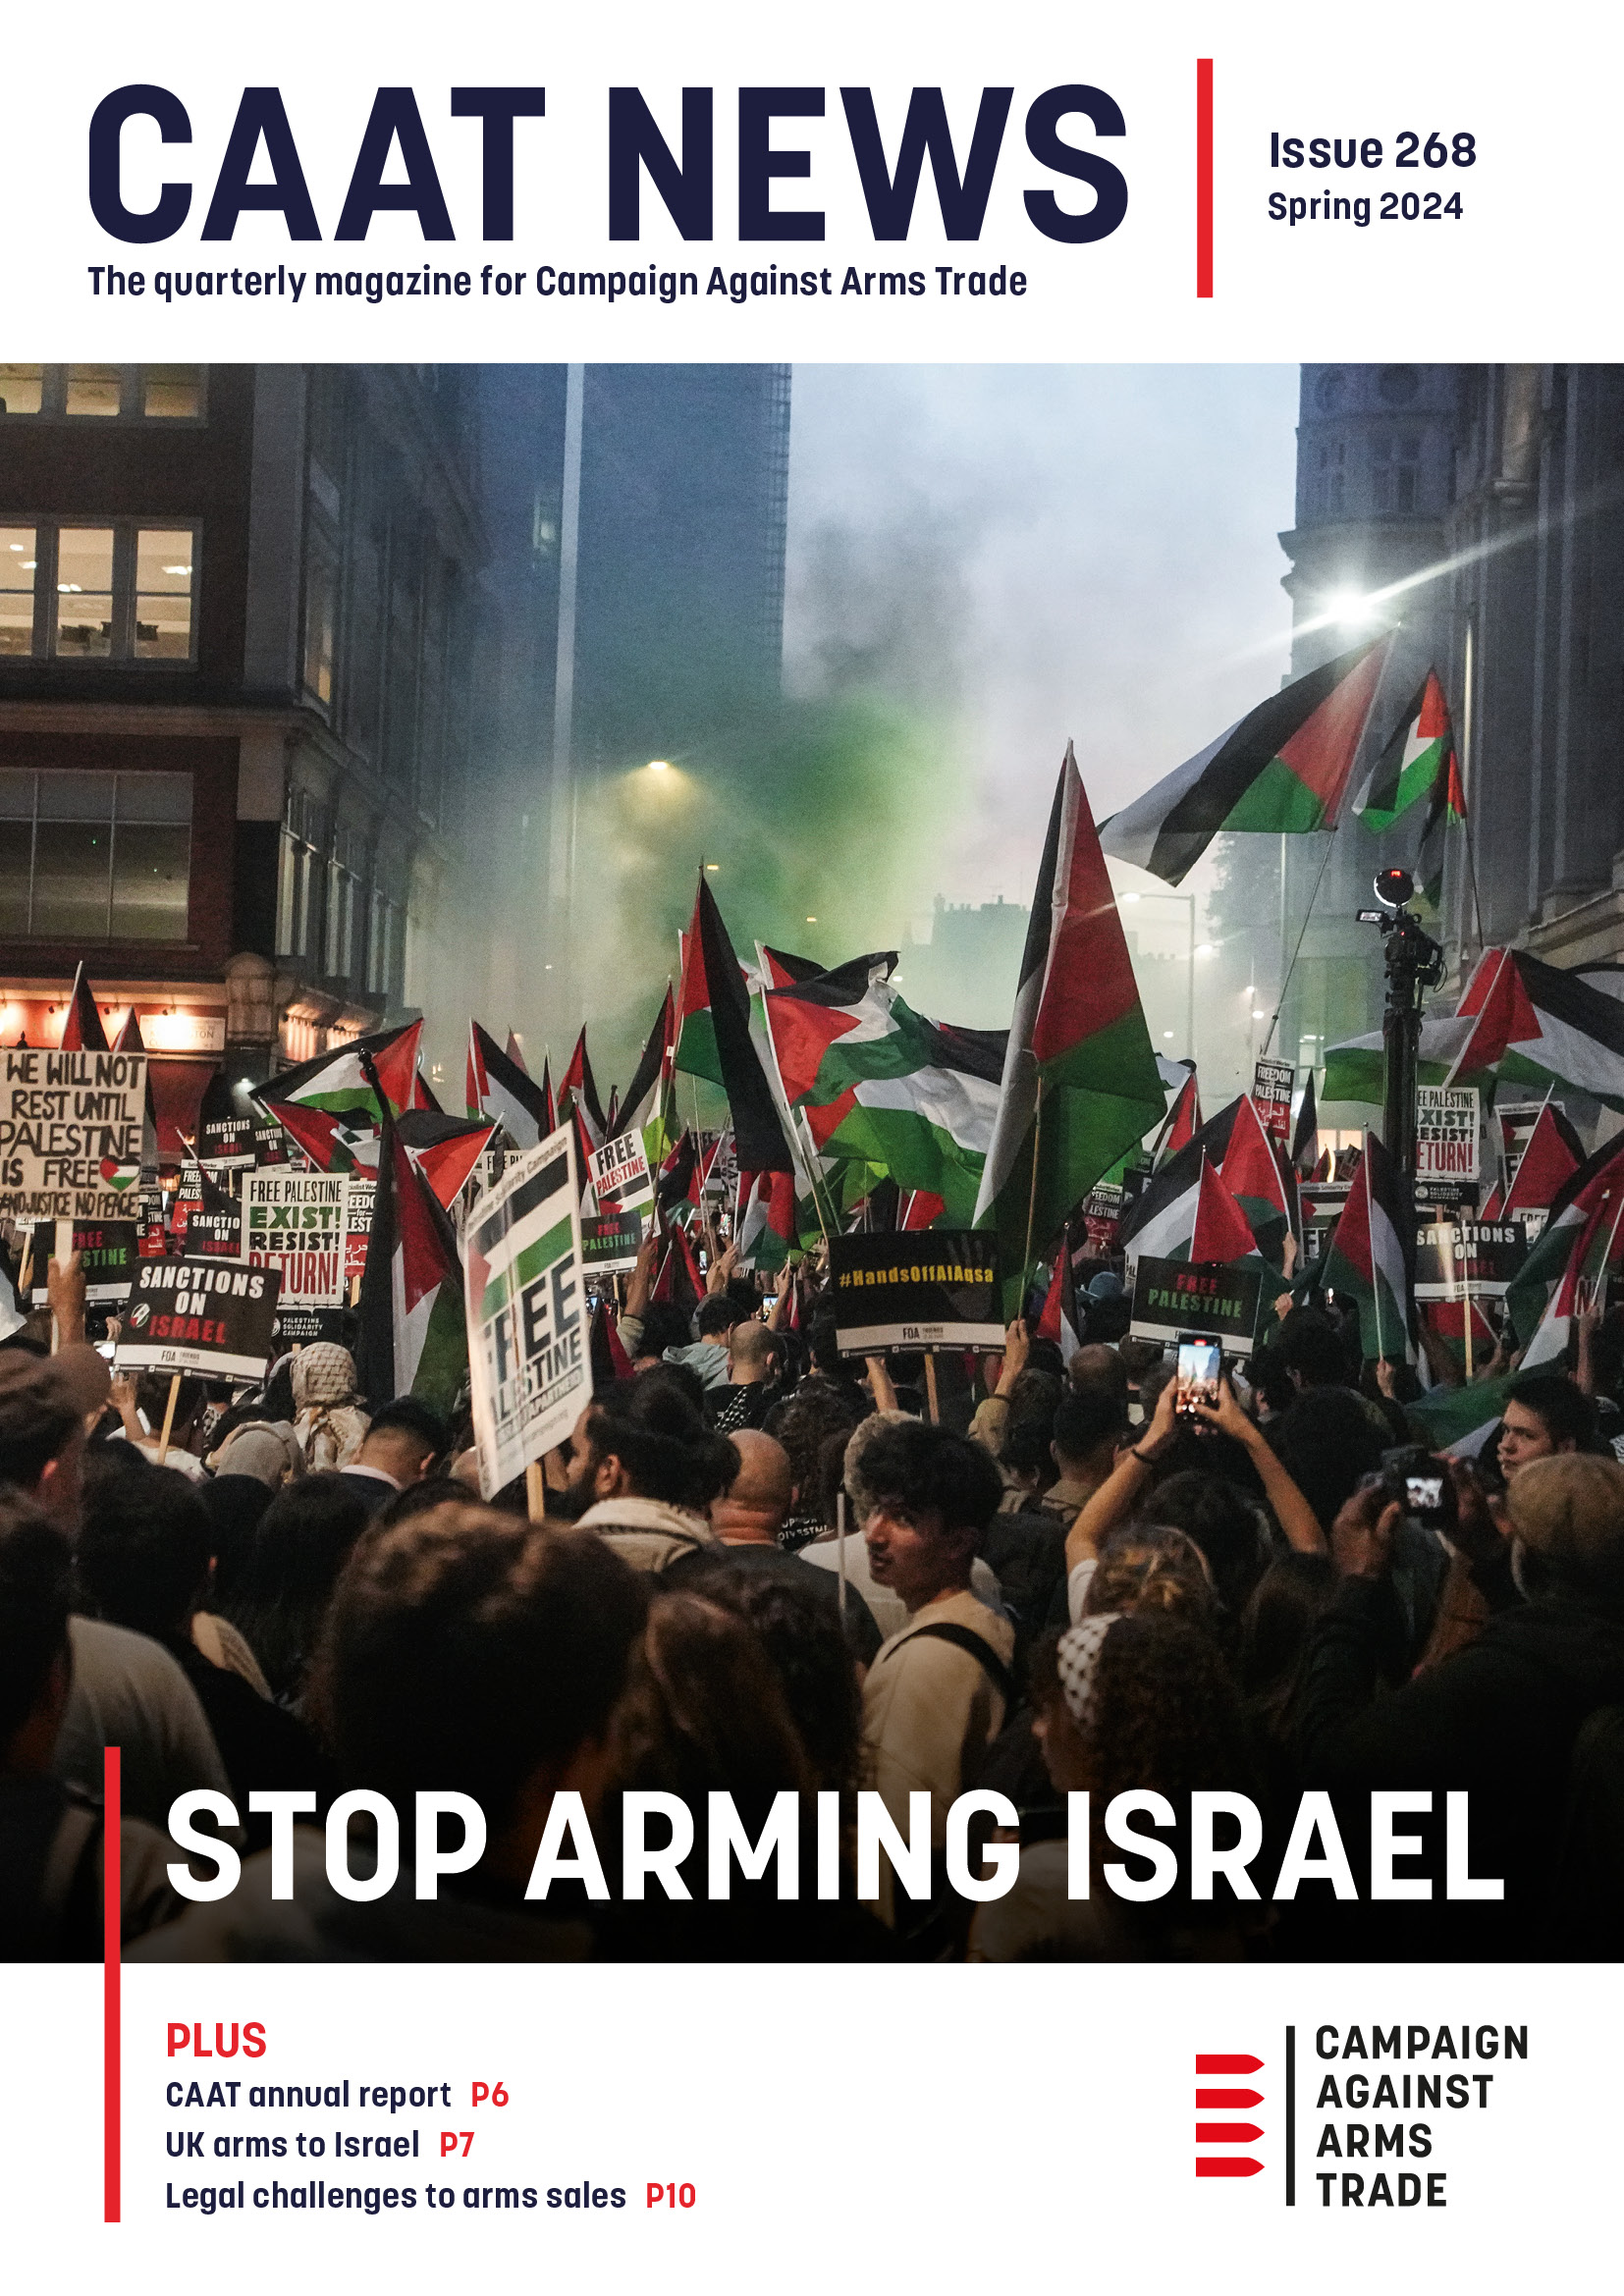 Cover of CAAT News 268. Image shows large demonstration with Palestinian flags and smoke. Overlaid with caption Stop Arming Israel.